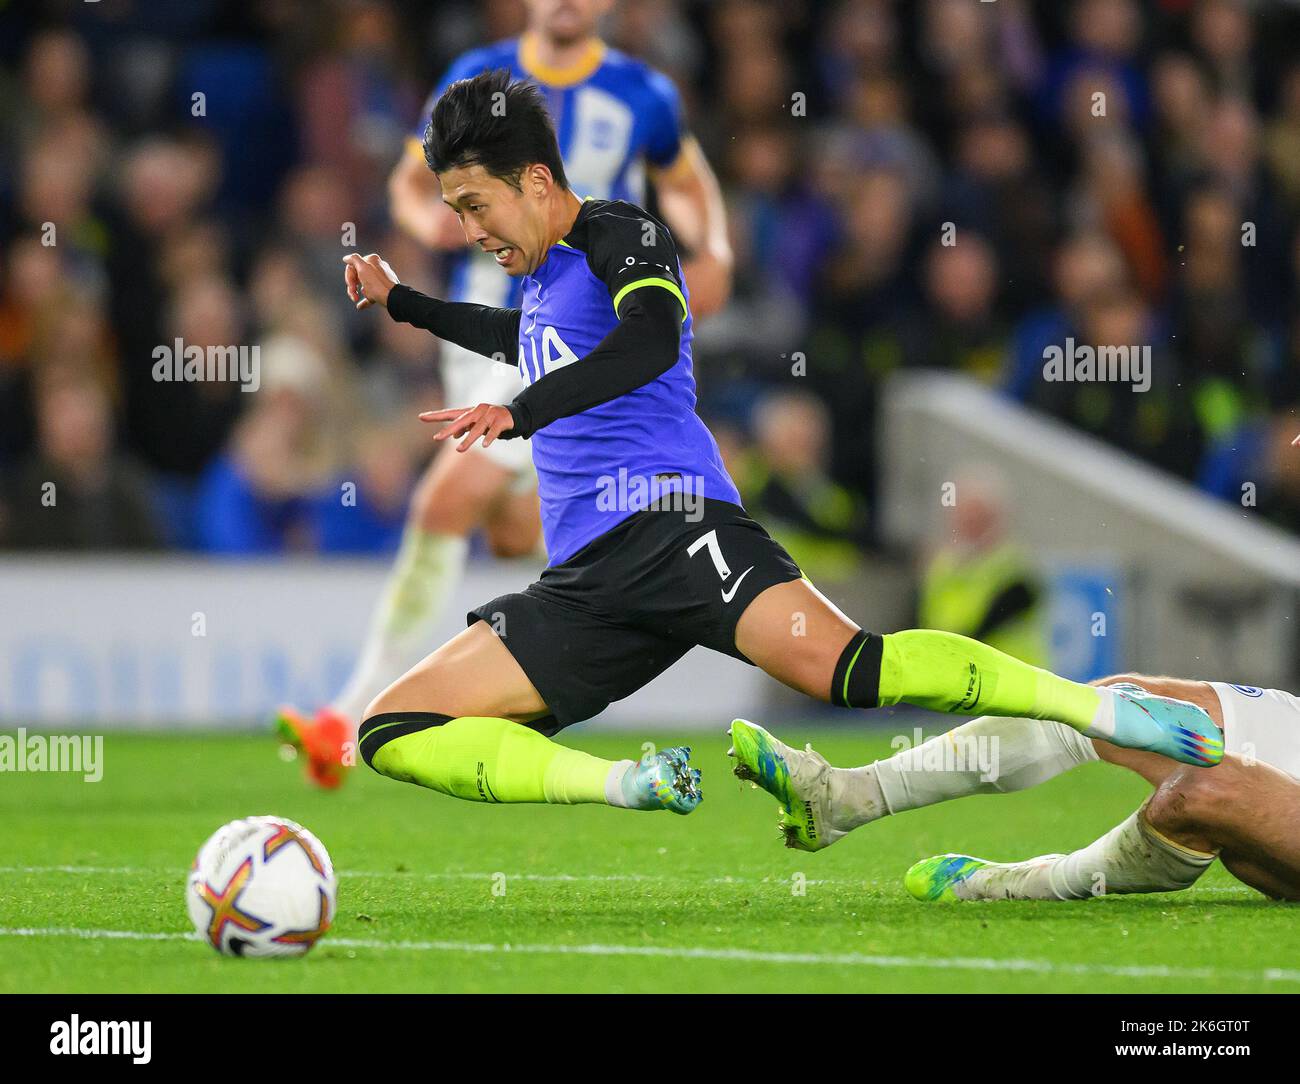 08 Oct 2022 - Brighton and Hove Albion v Tottenham Hotspur - Premier League - Amex Stadium  Tottenham's Heung-Min Son is tackled by Lewis Dunk during the Premier League match against Brighton. Picture : Mark Pain / Alamy Live News Stock Photo